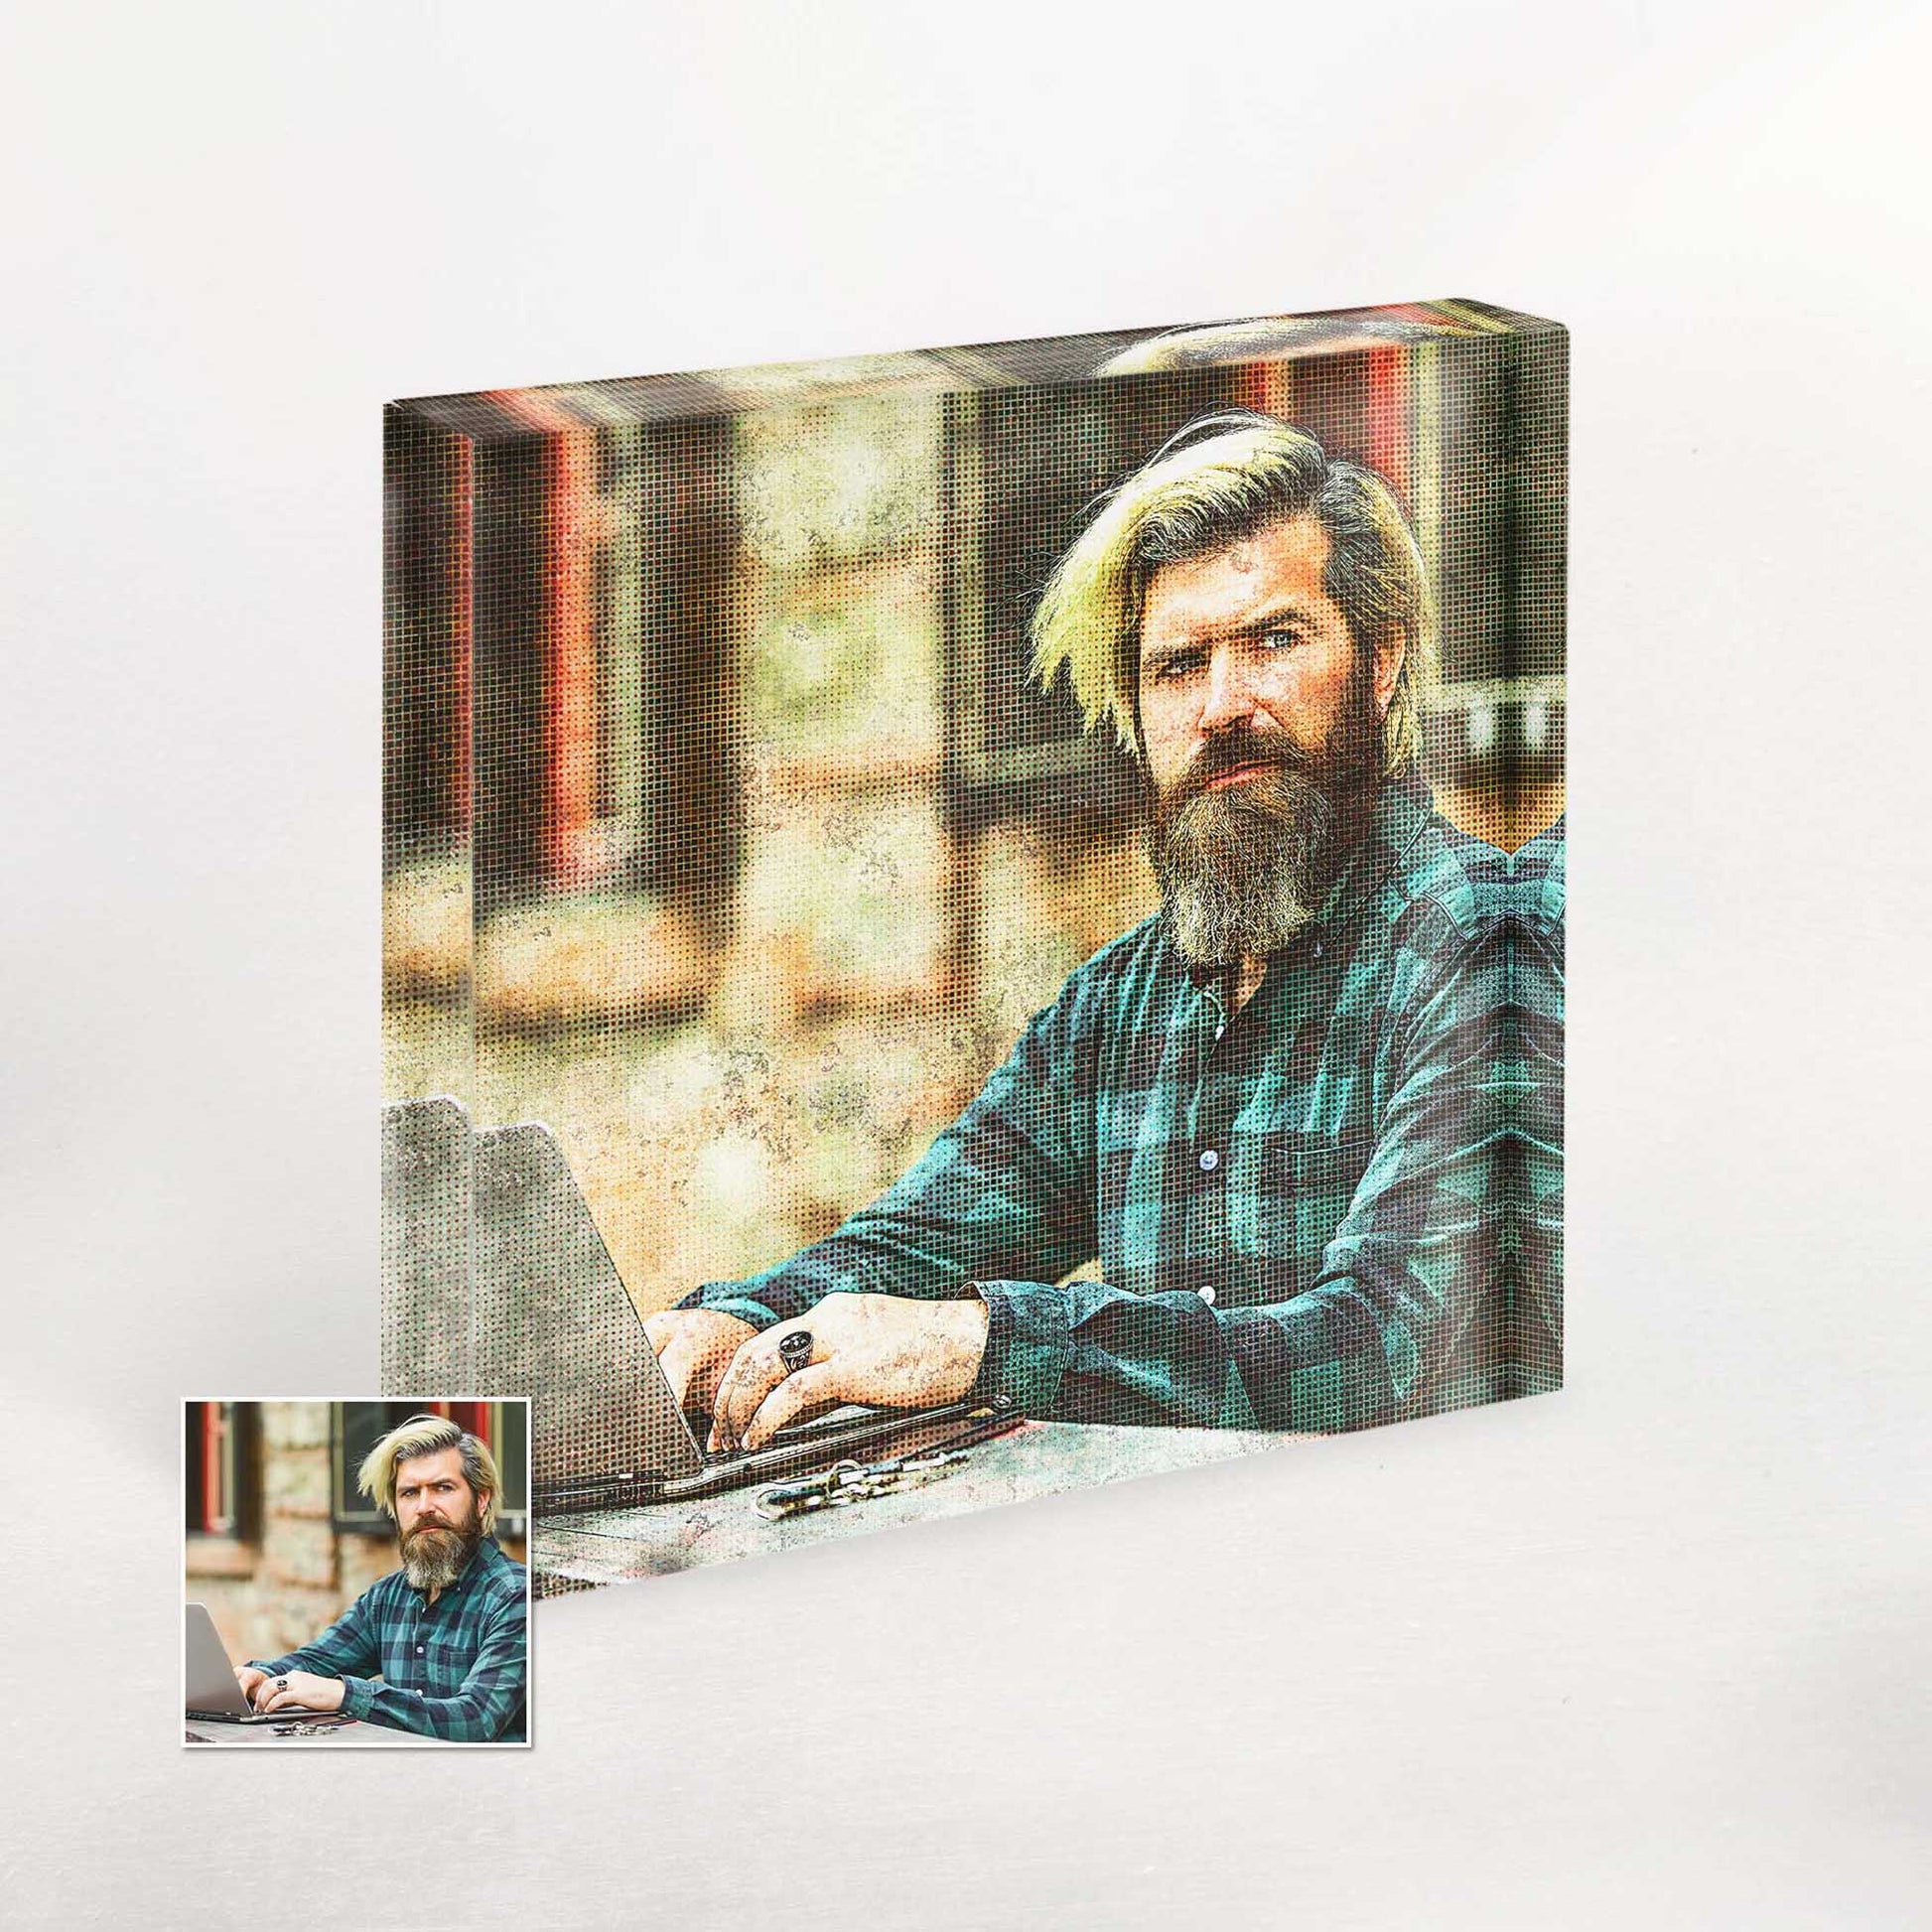 Experience the beauty of a Personalised Grunge FX Acrylic Block Photo, combining oldschool charm and halftone aesthetics. This unique and creative home decor item adds an original touch to any space